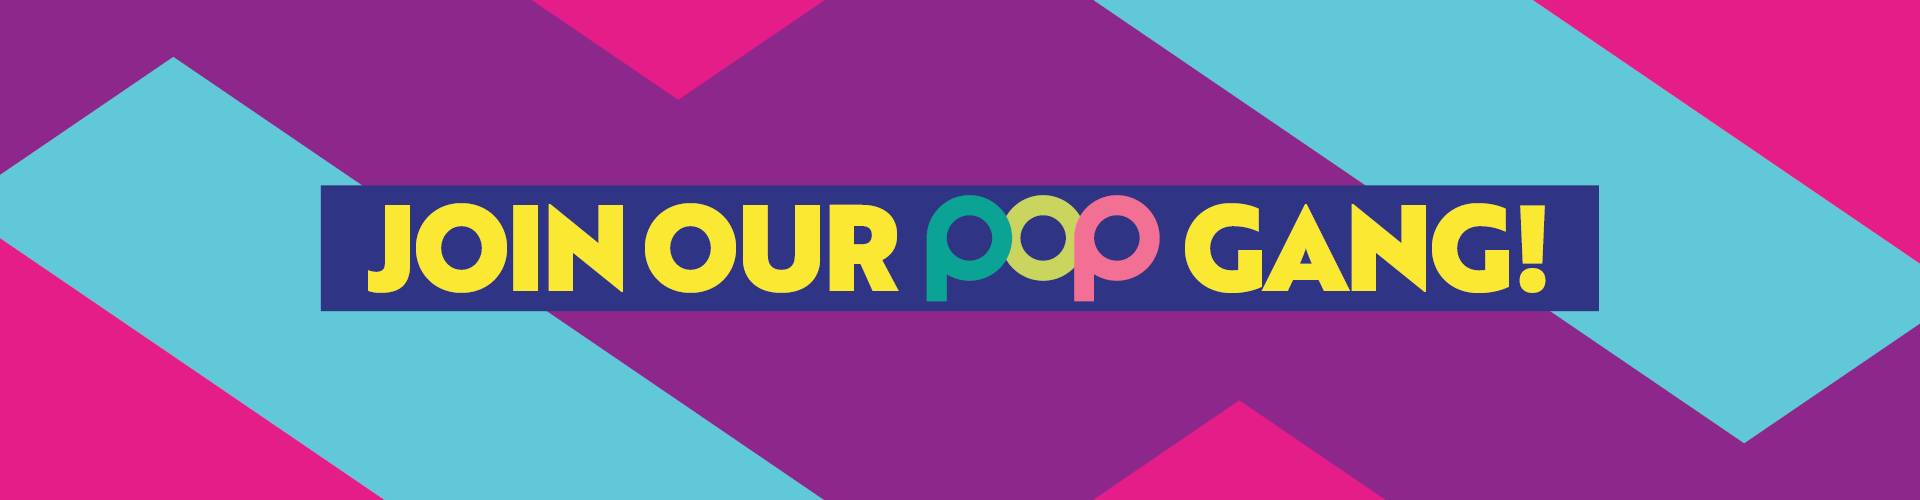 Join our Popworld Southend gang! Sign up today